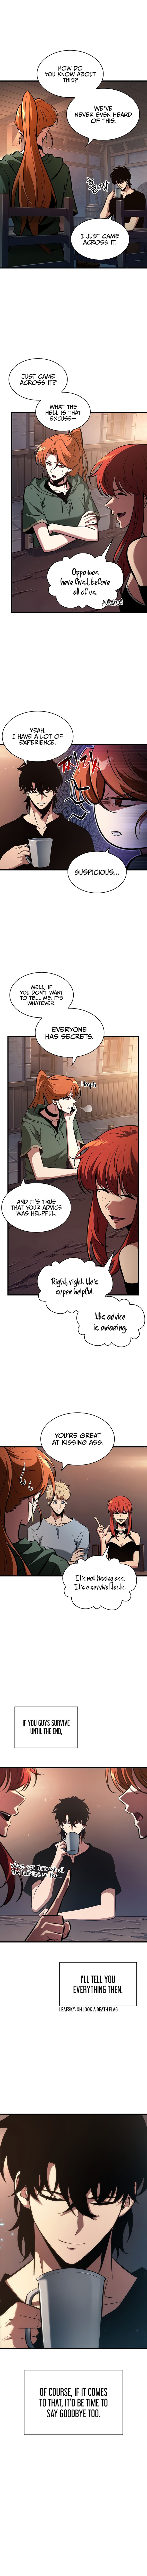 Pick Me Up Chapter 43 page 5